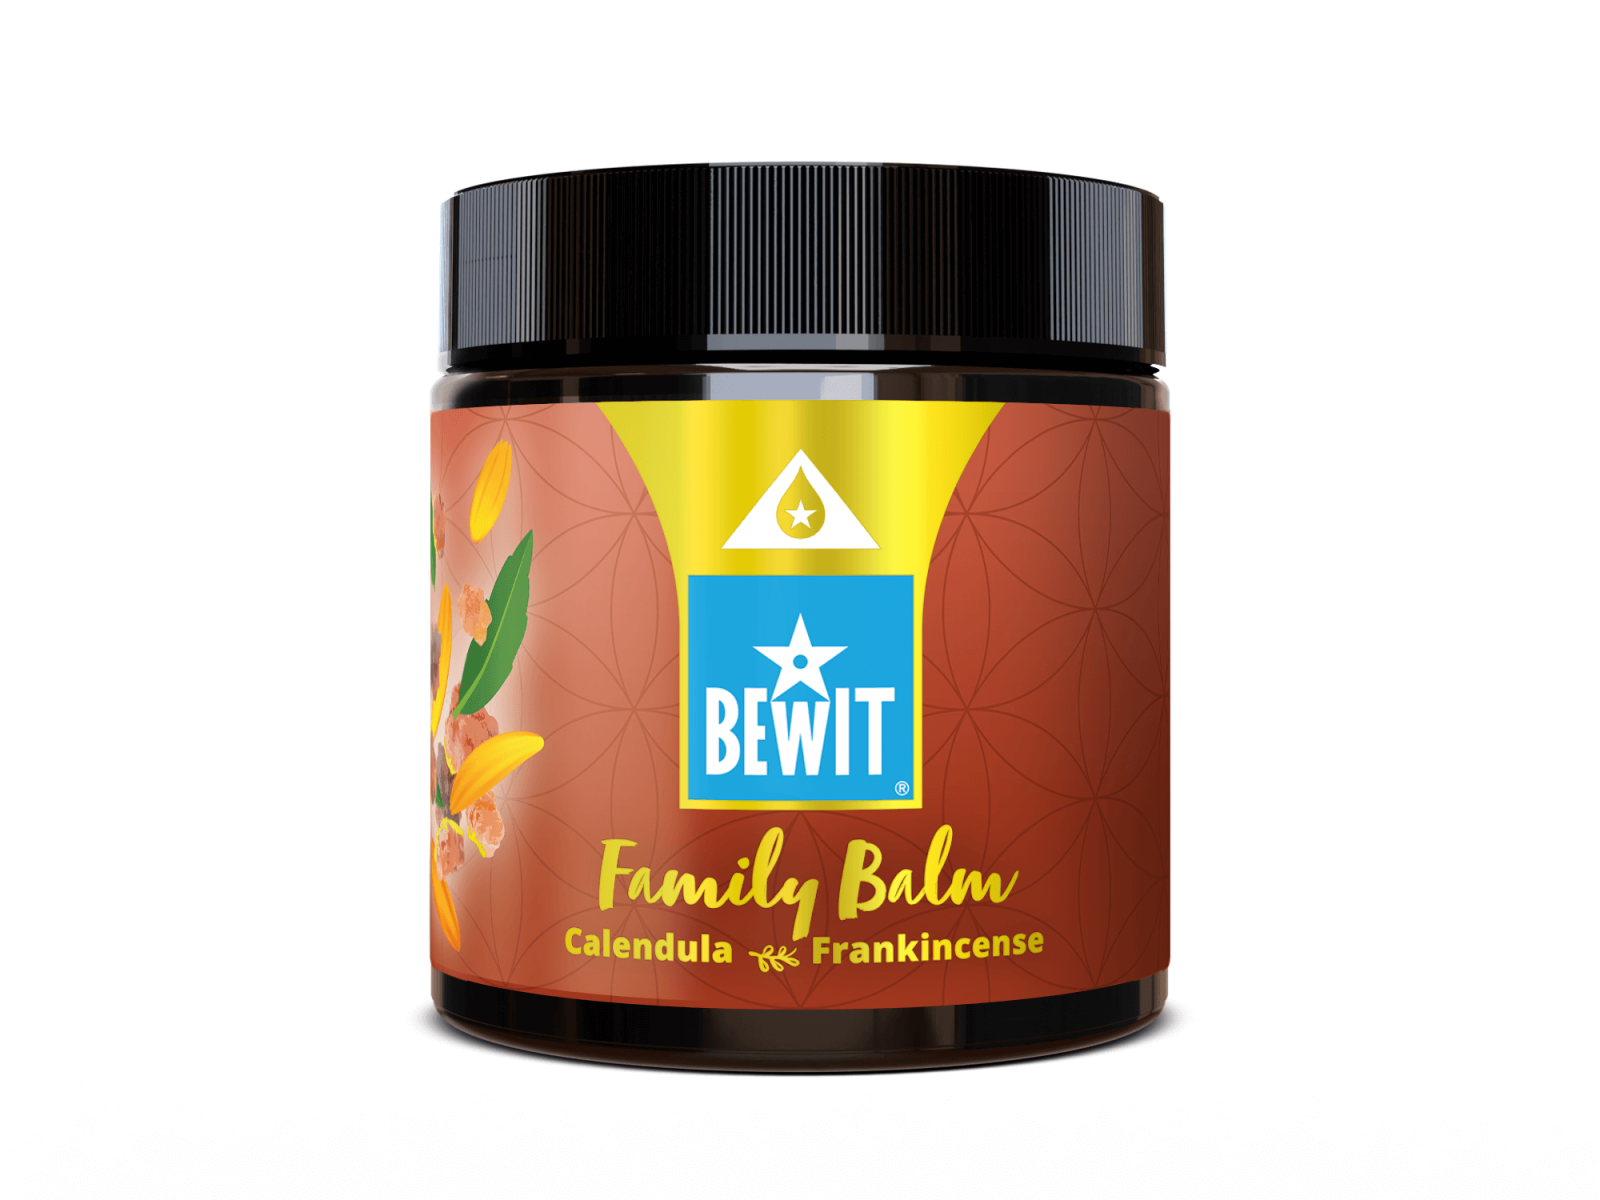 BEWIT FAMILY BALM CALENDULA  FRANKINCENSE - CARING BALM FOR THE WHOLE FAMILY - 2